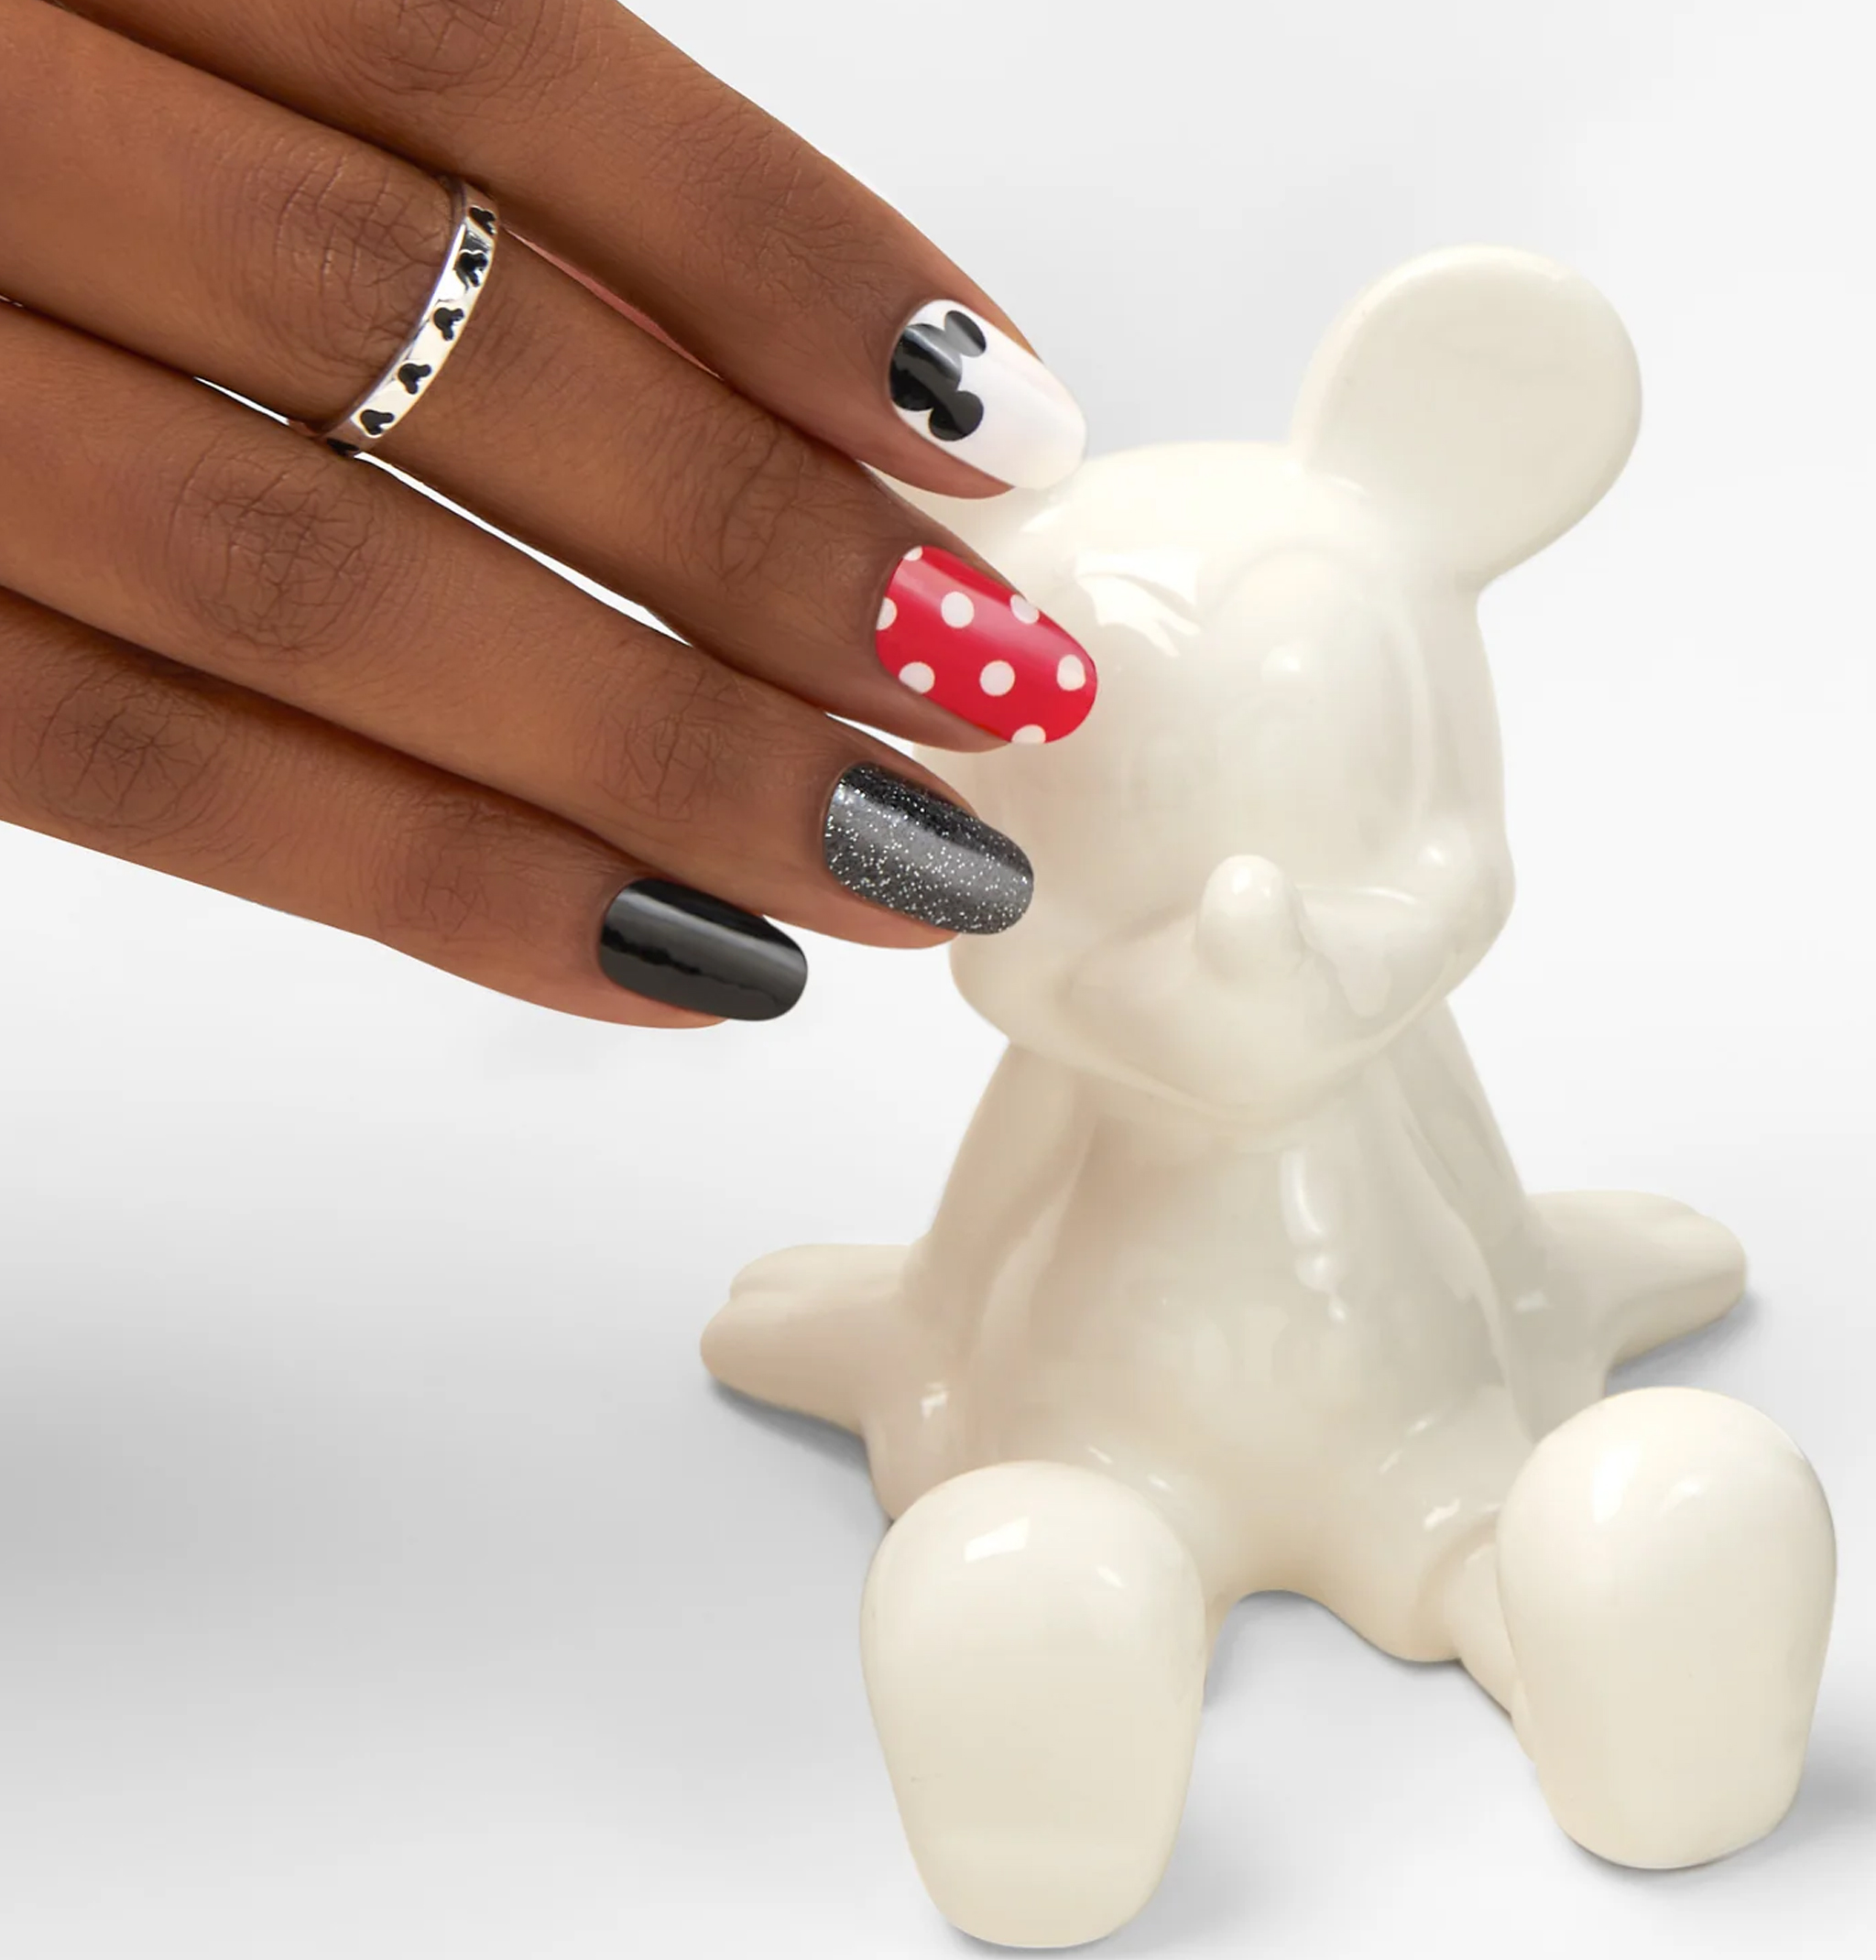 Diva Nails & Spa - ❤️🖤🤍DISNEY Mickey and Minnie Mouse🤍🖤❤️ Inspired nail  art ONLY at DIVA NAILS & SPA Tomball 😍 Call us to book your appointment  today! - ❤️ DIVA NAILS